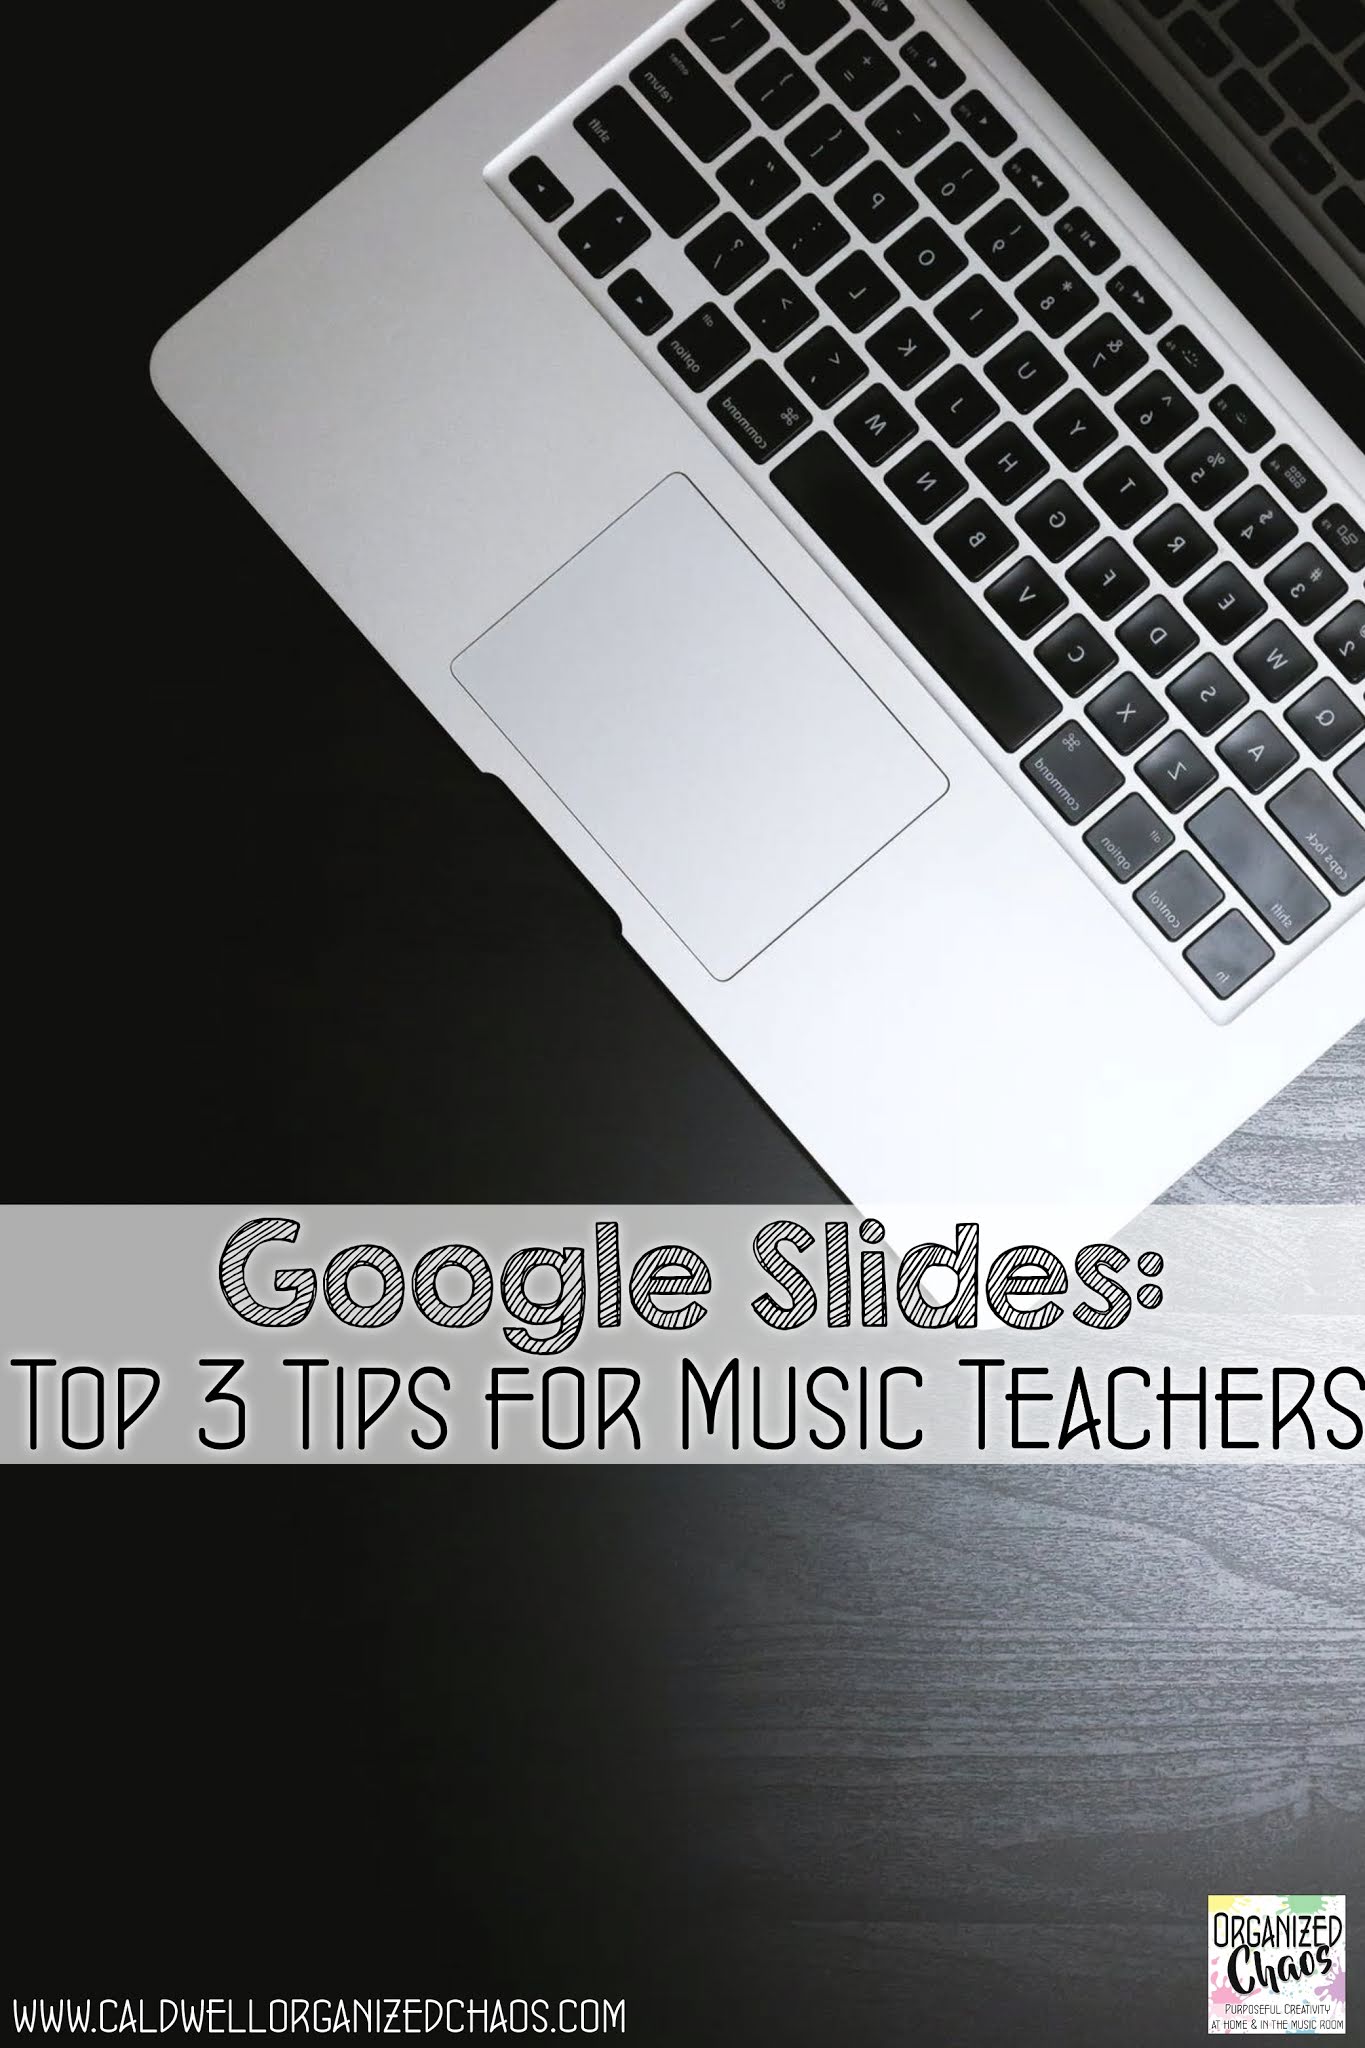 Setting Up Your MIOSM® Song Bracket in Google Slides®